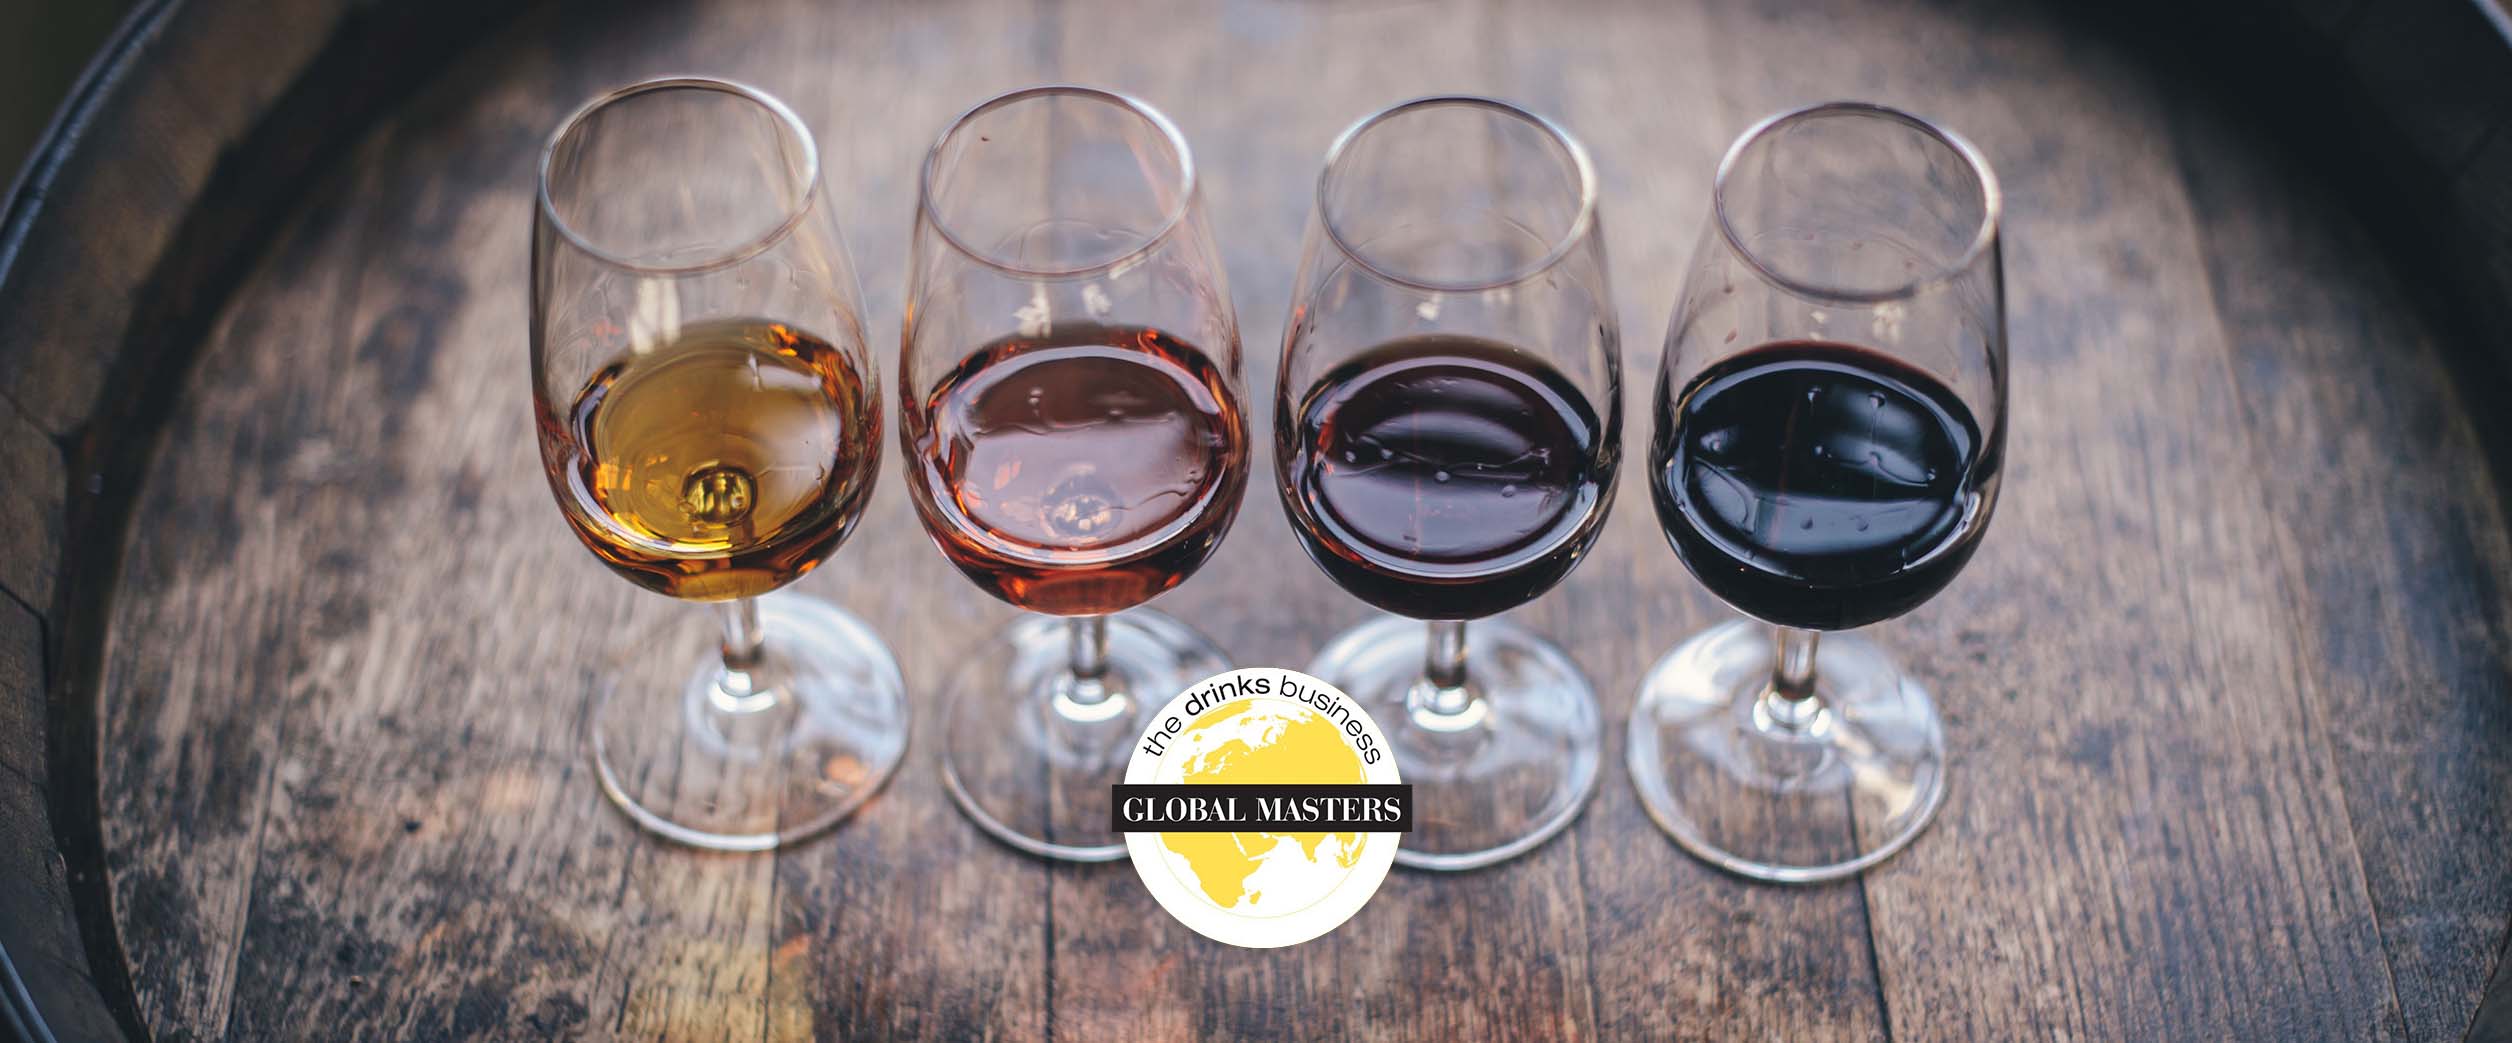 The Global Wine Masters Competitions